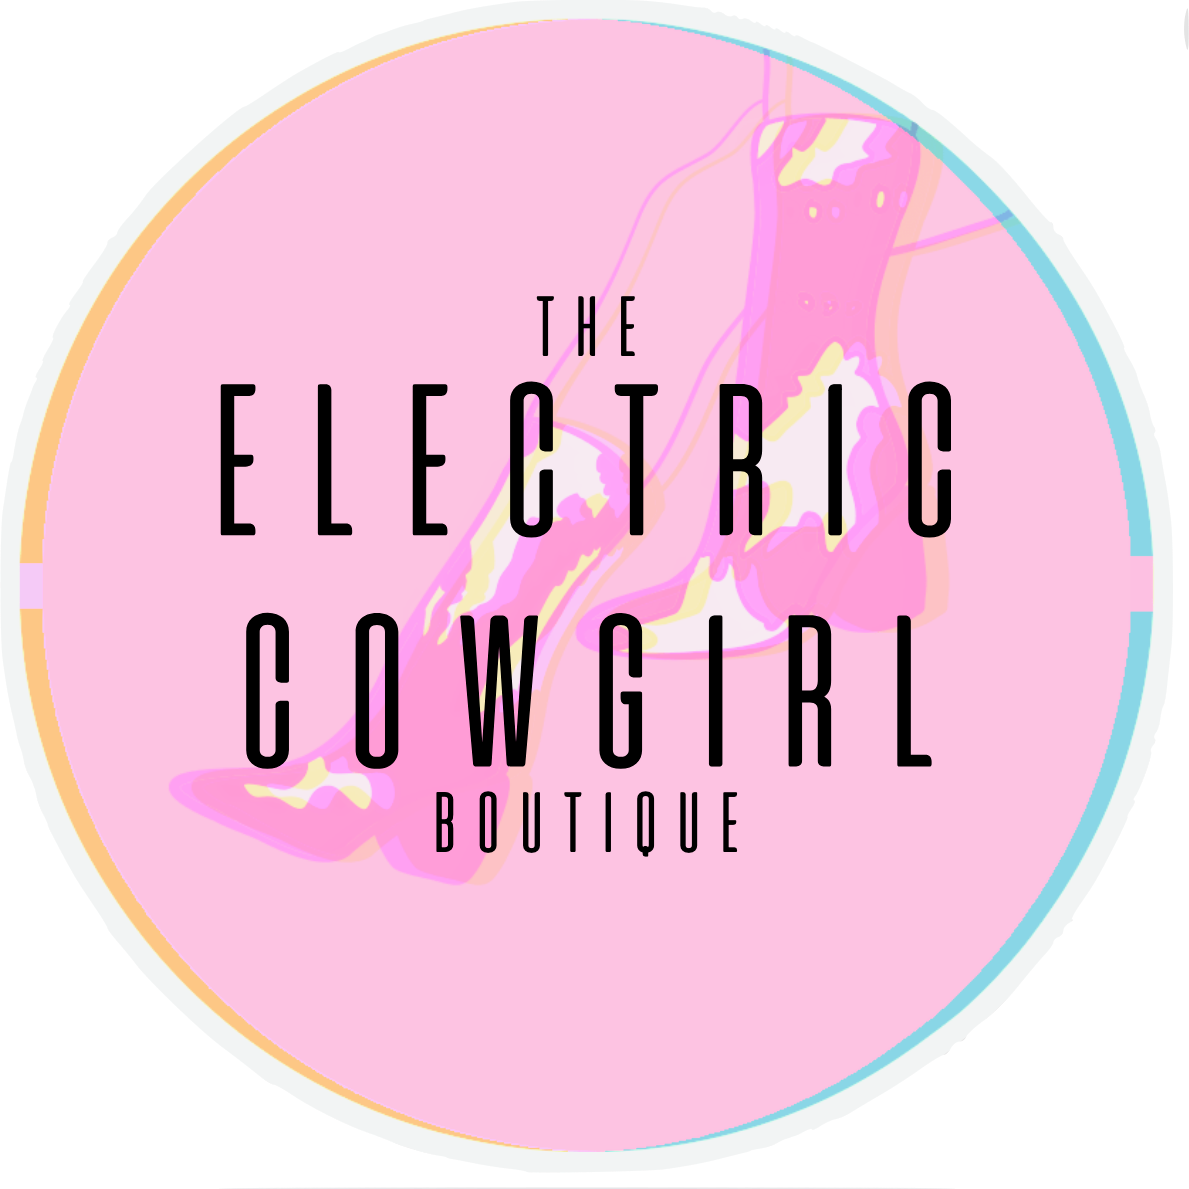 The Electric Cowgirl Boutique